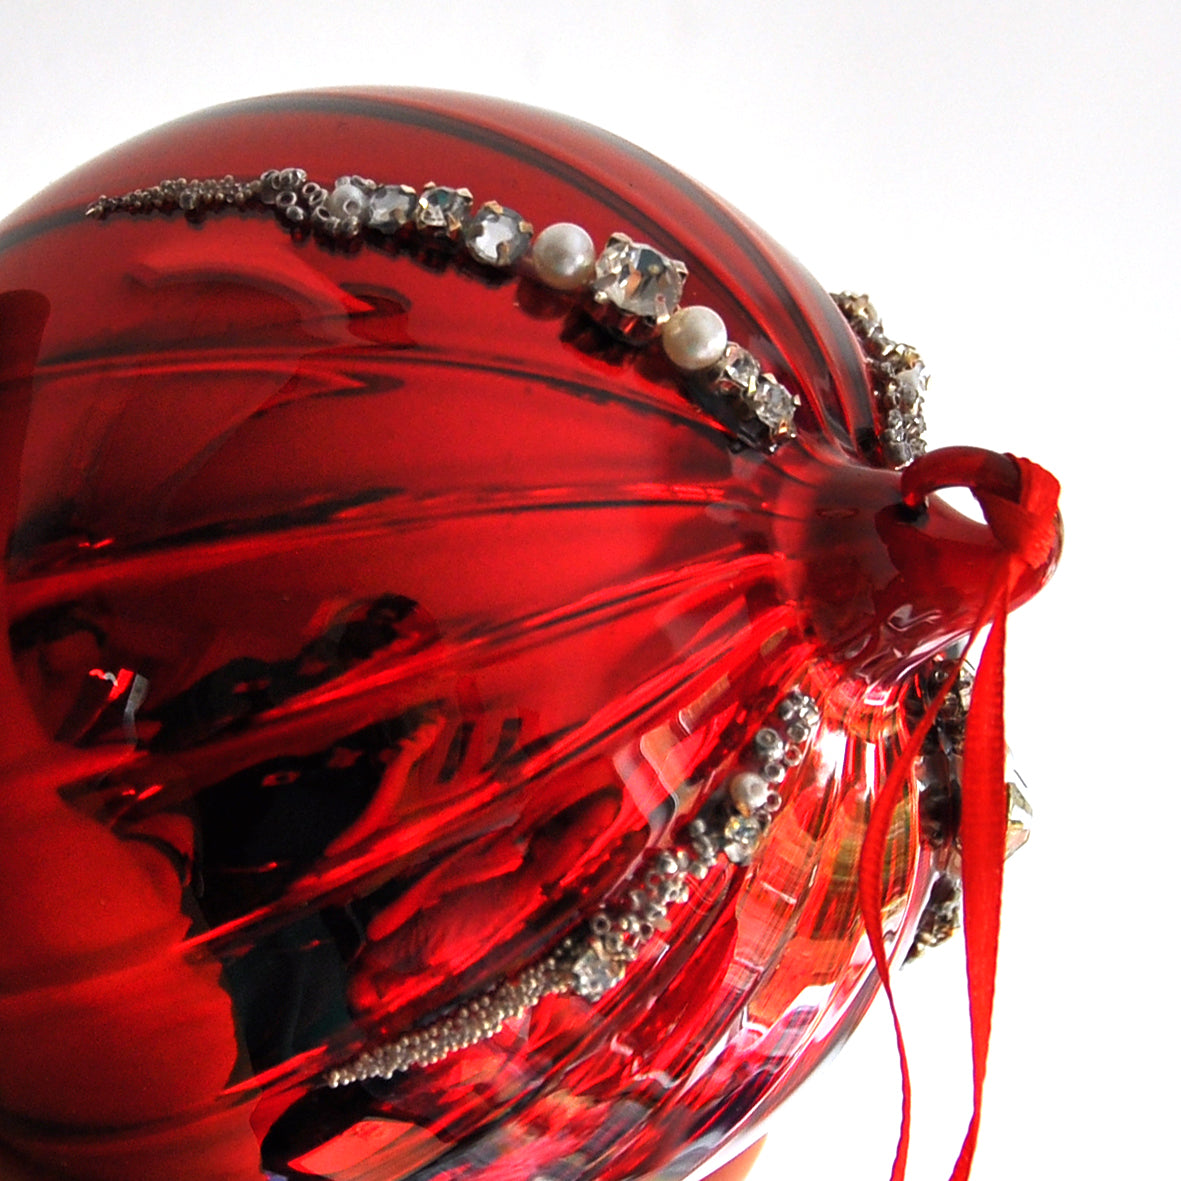 This red mirror droplet shape Christmas ornament is made from glass and decorated with beads, pearls and diamonte.